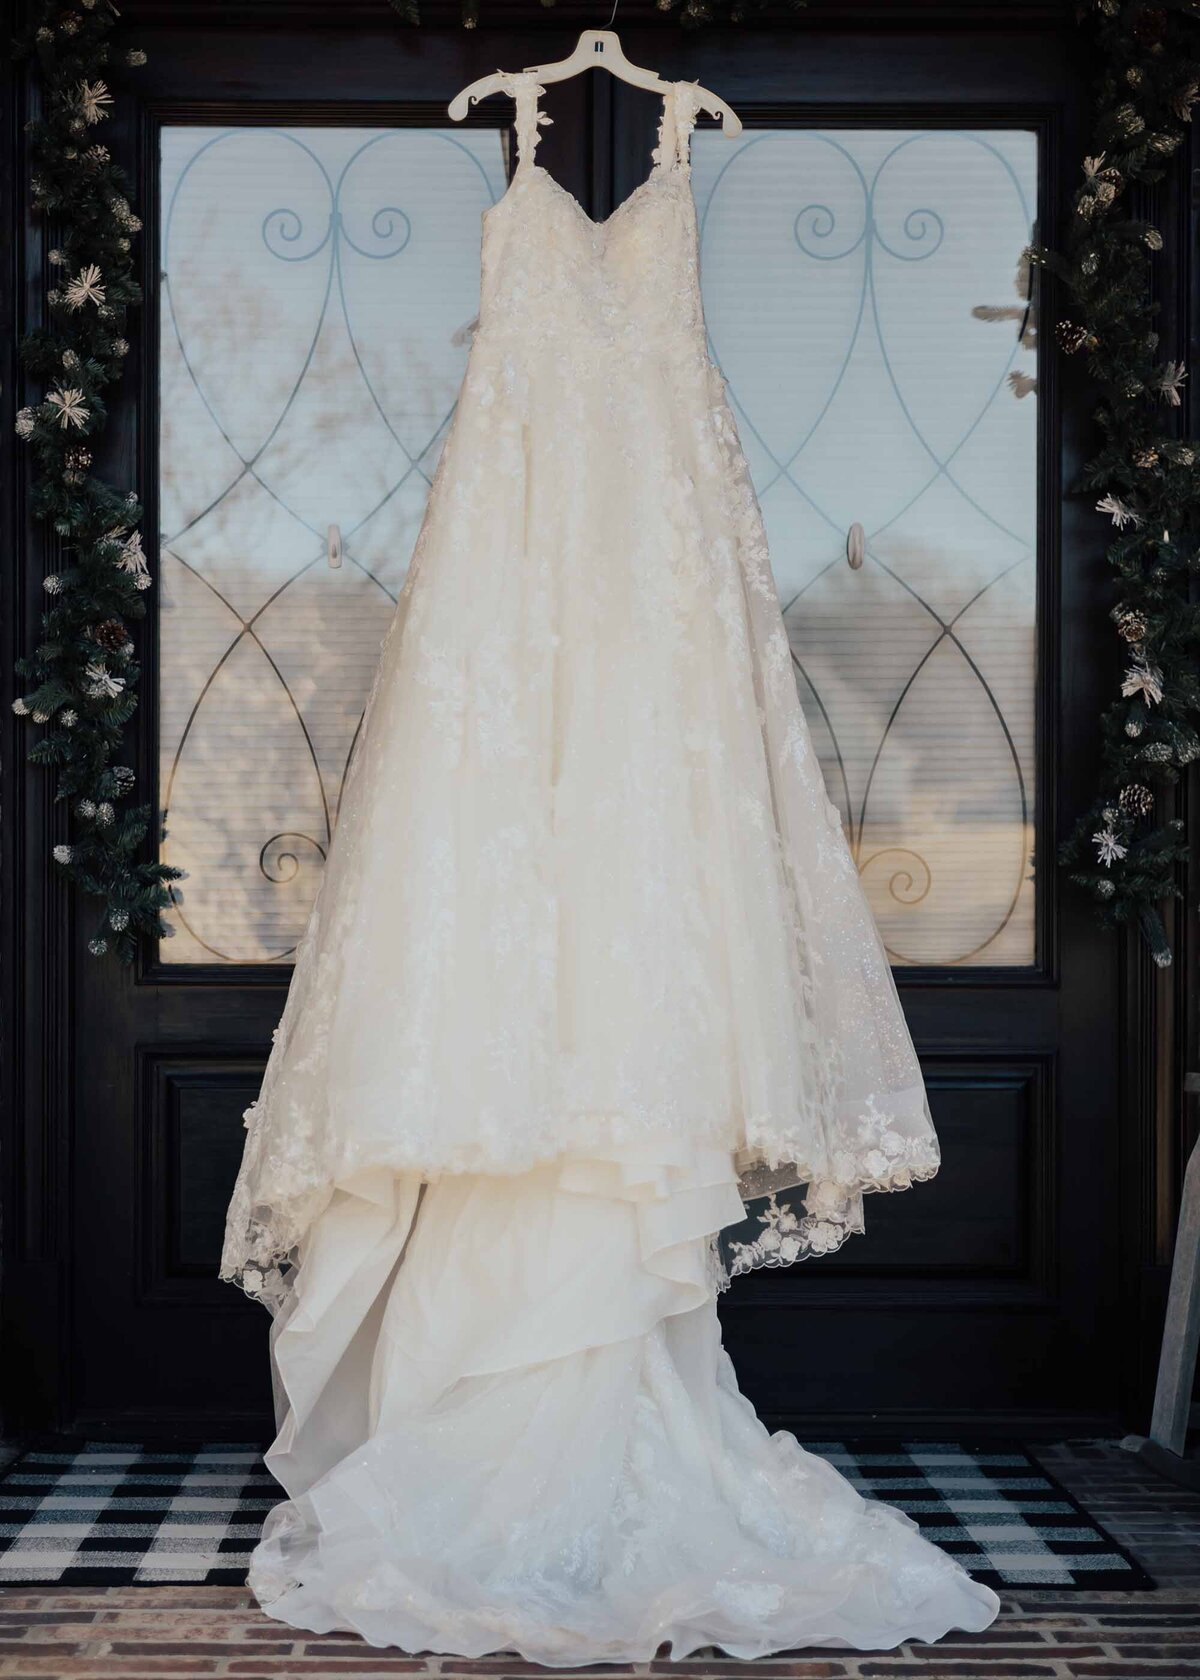 Maddie Rae Photography big fluffy wedding dress hanging from the light fixture of the front porch of the venue